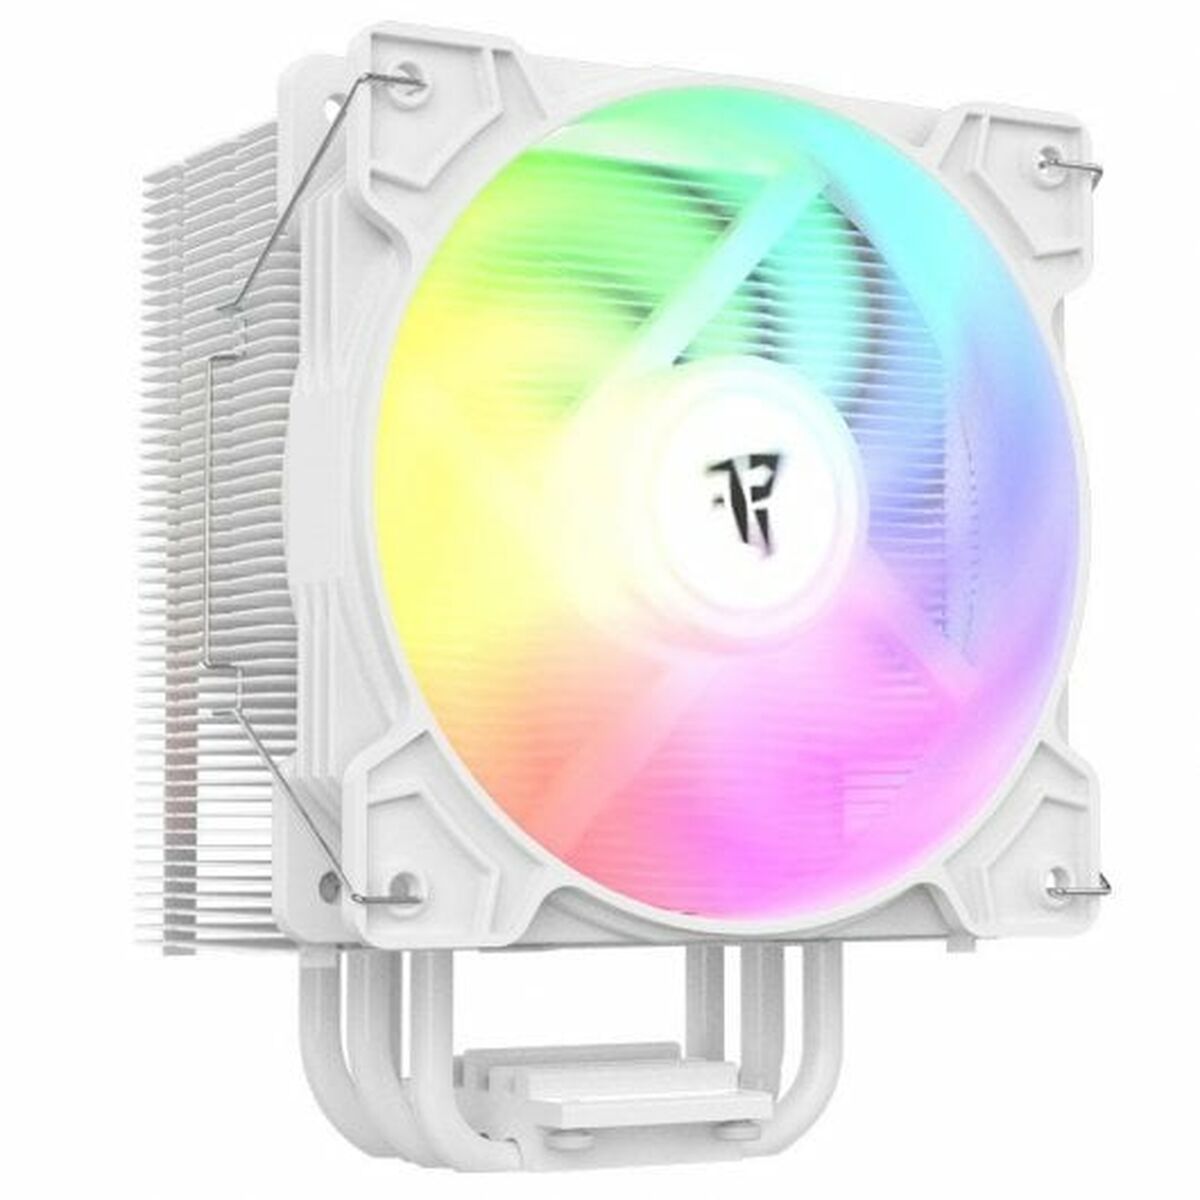 CPU Fan Tempest, Tempest, Computing, Components, cpu-fan-tempest-6, Brand_Tempest, category-reference-2609, category-reference-2803, category-reference-2815, category-reference-t-19685, category-reference-t-19912, category-reference-t-21360, category-reference-t-25668, category-reference-t-29842, computers / components, Condition_NEW, Price_100 - 200, Teleworking, RiotNook